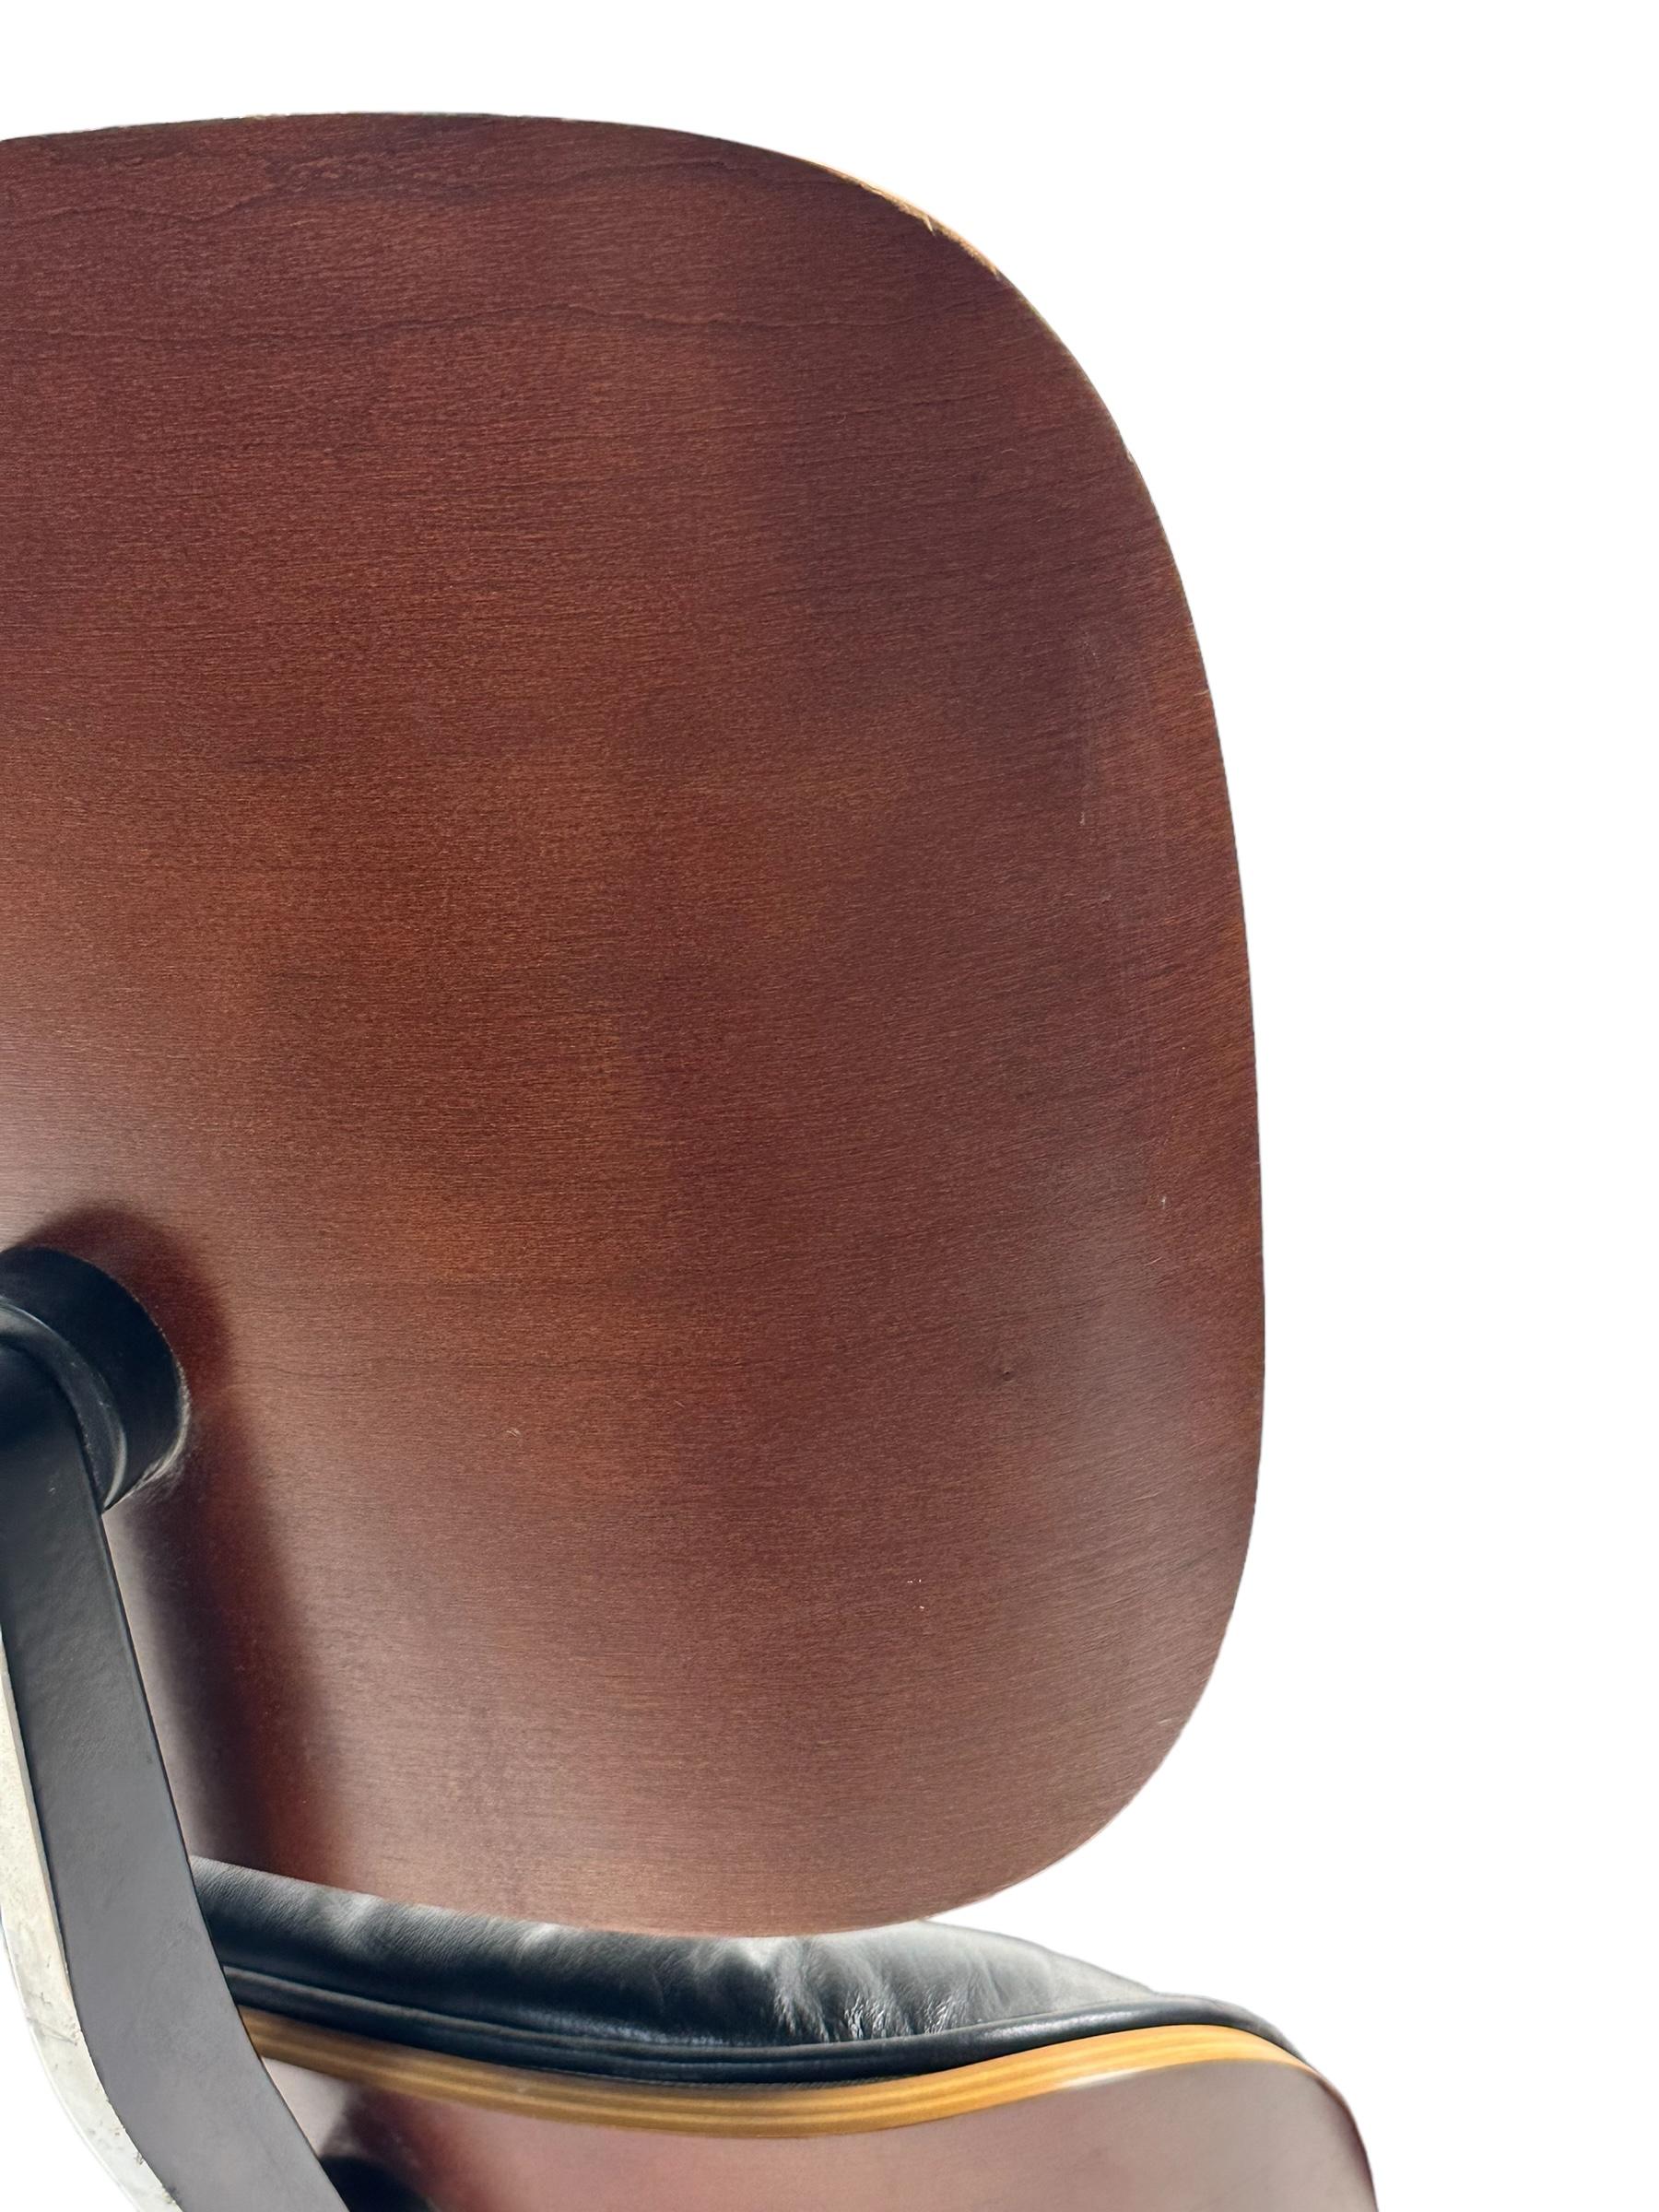 Eames Lounge Chair and Ottoman  For Sale 9